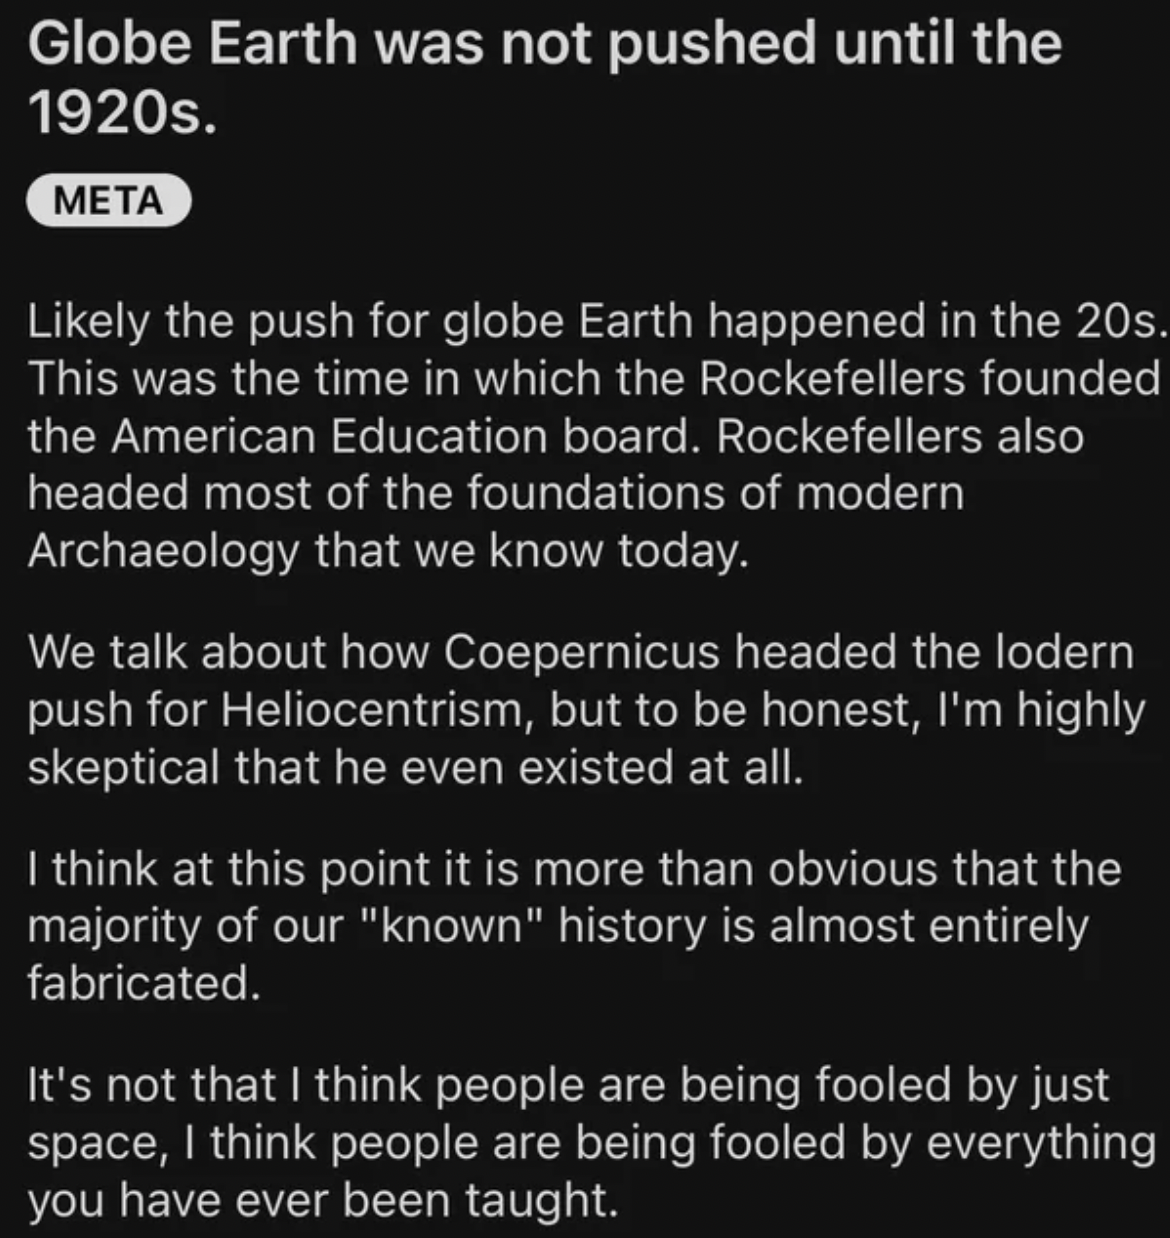 Confidently Incorrect - Globe Earth was not pushed until the 1920s.